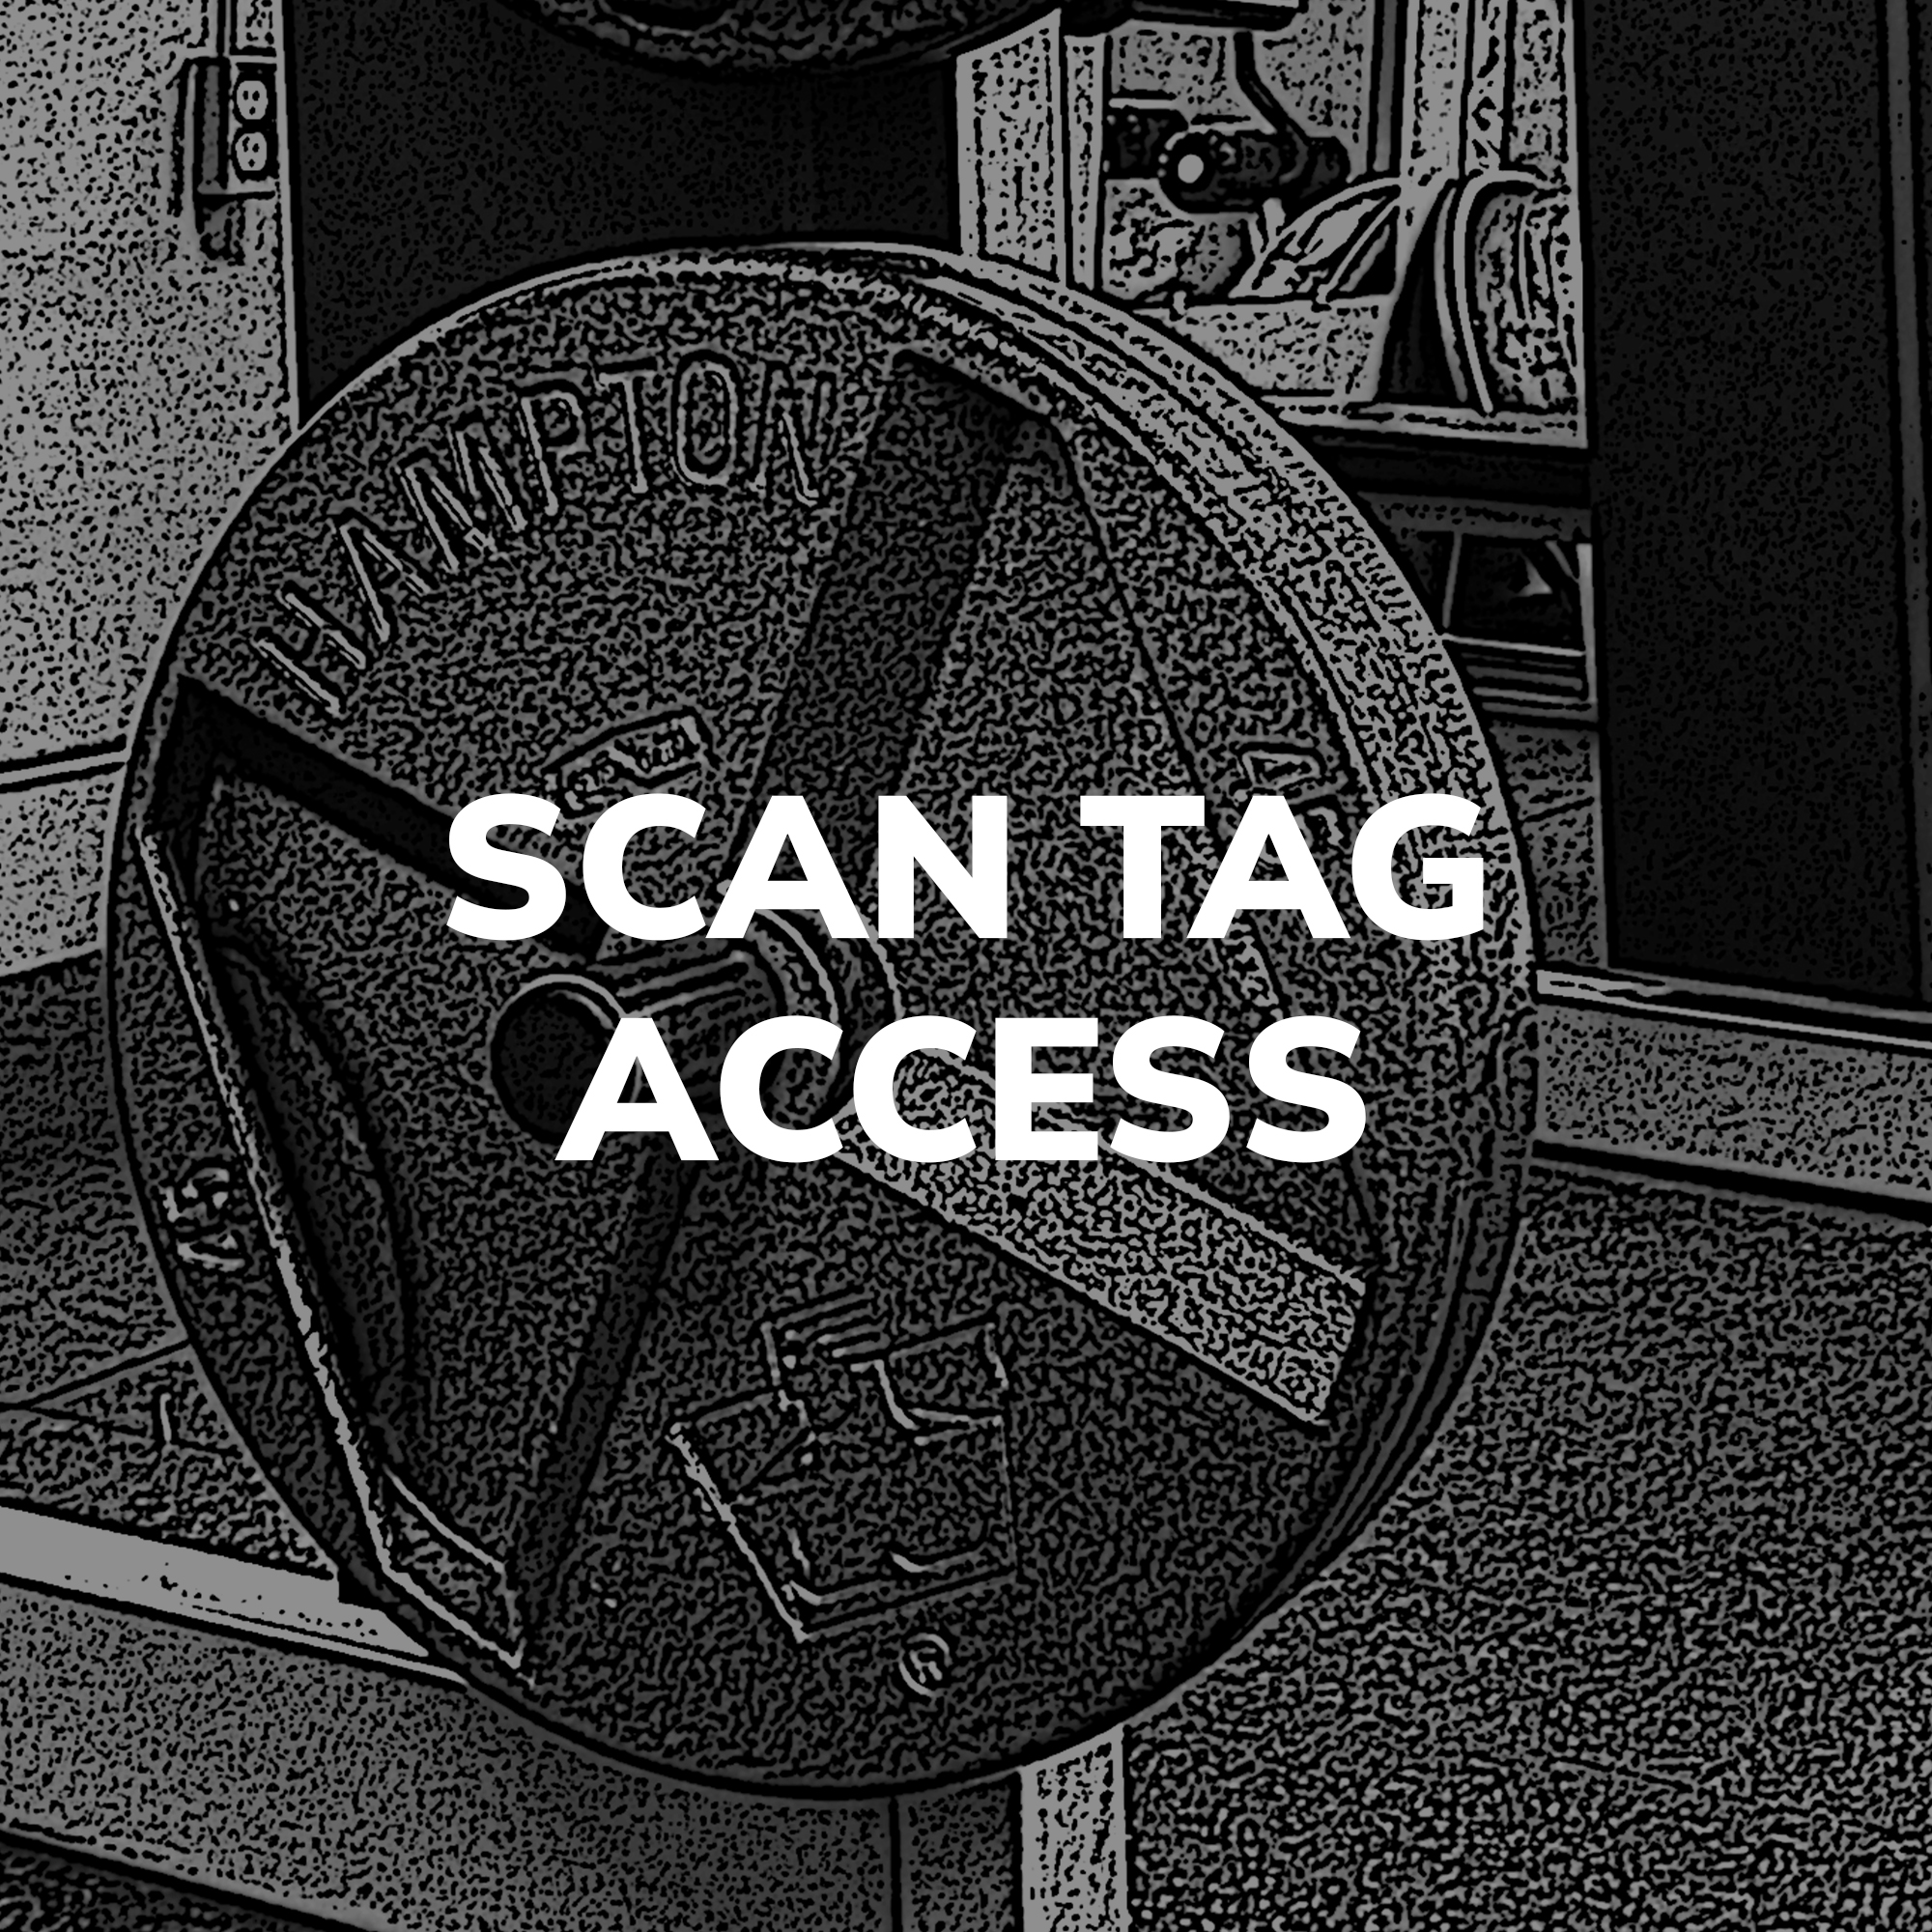 Scan tag access